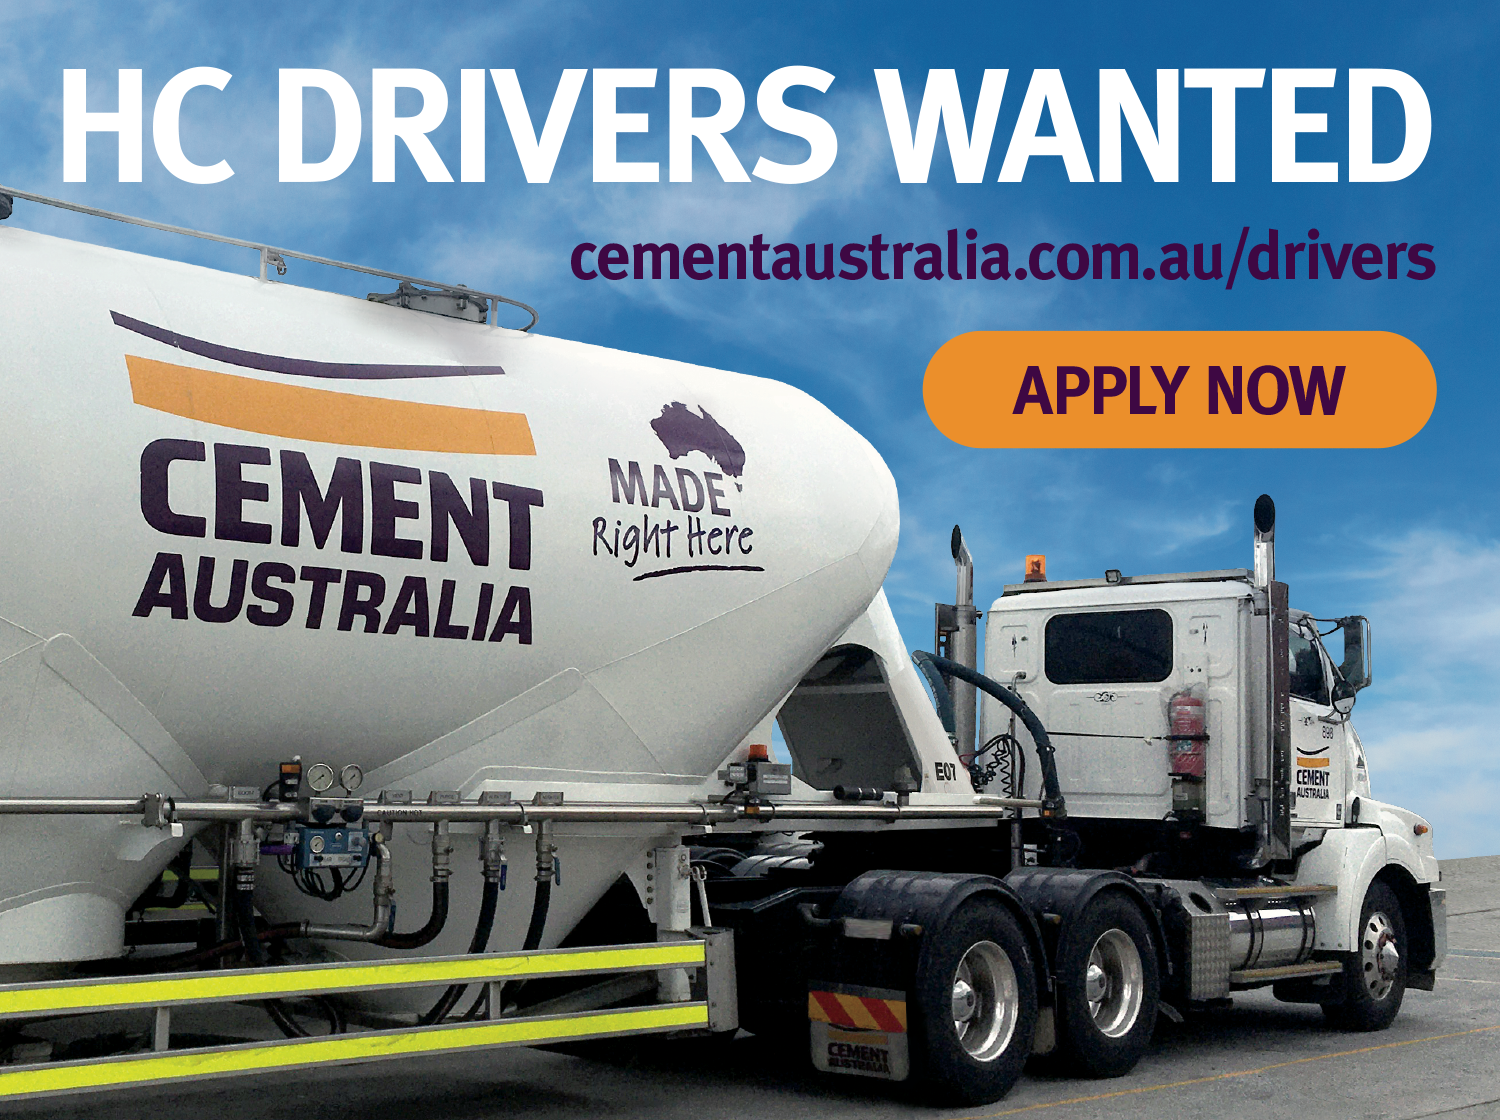 DRIVE WITH US - Apply today!